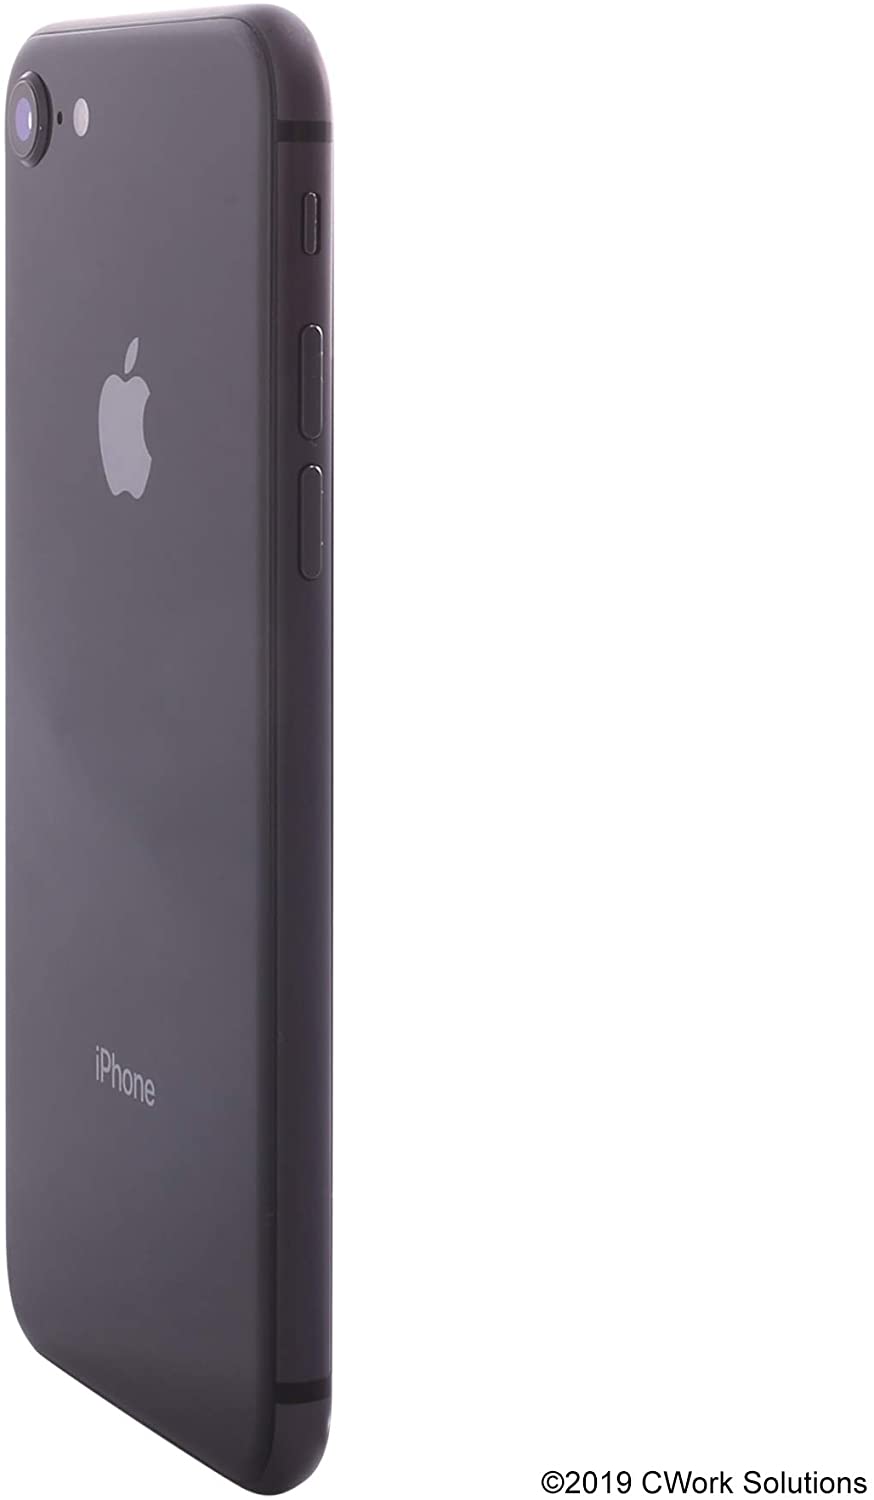 APPLE IPHONE 8 64GB UNLOCKED SMARTPHONE-BLK  Refurbished with Charger - Atlas Computers & Electronics 